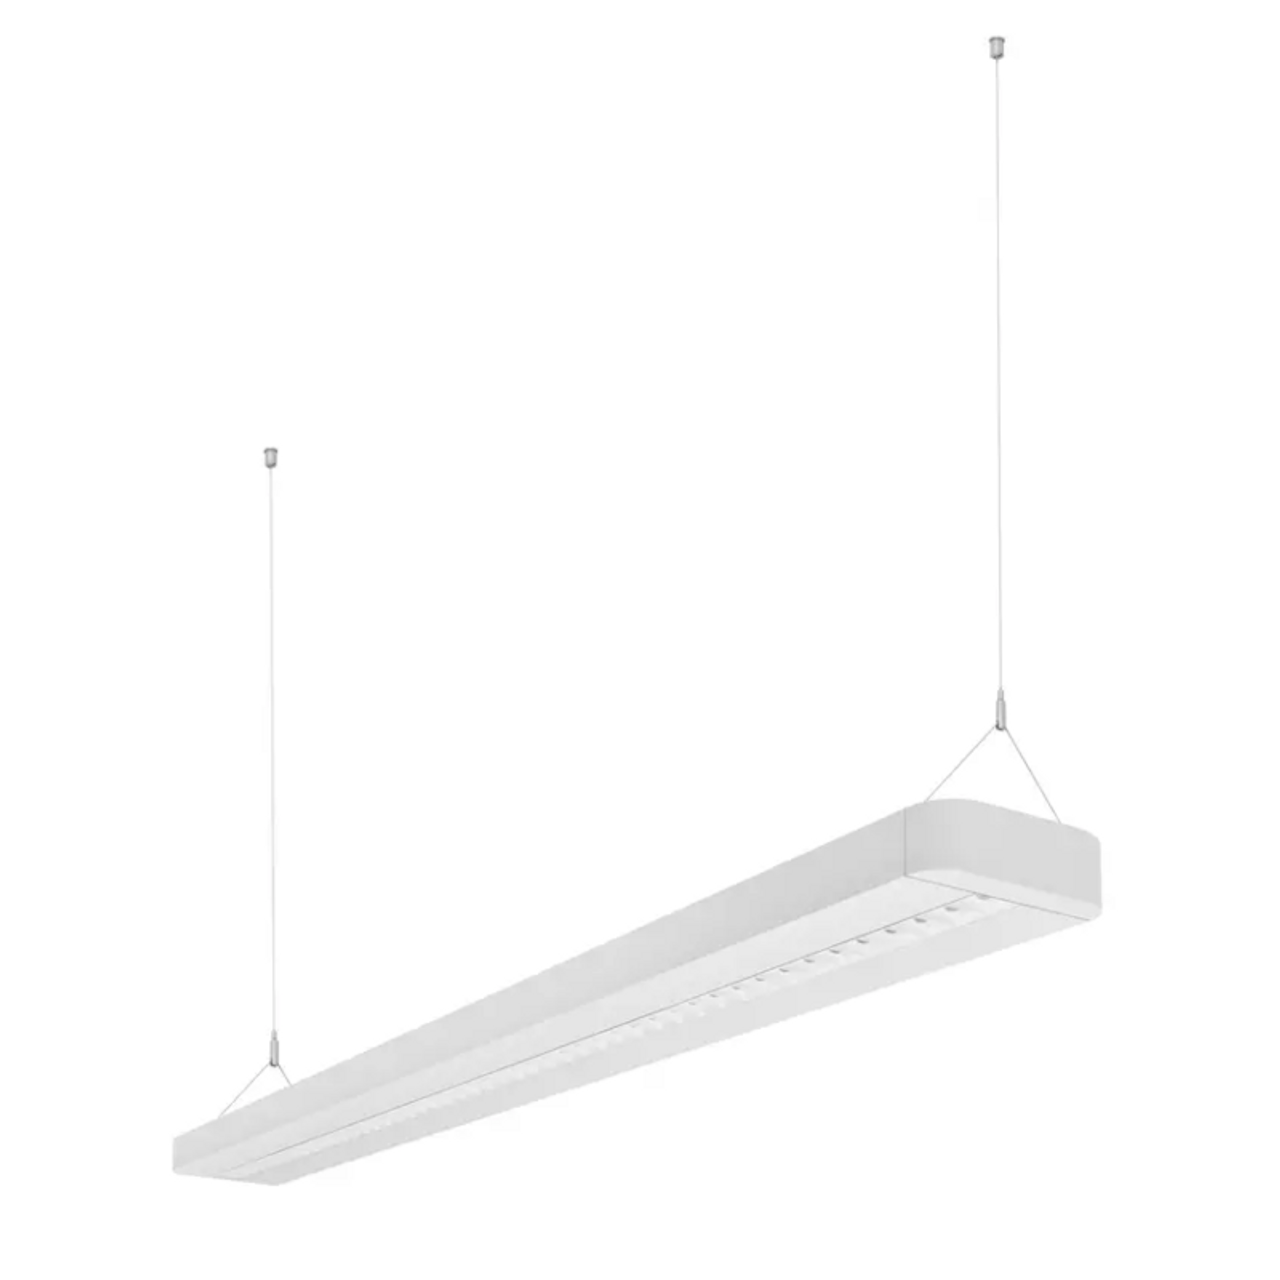 LED Linear Indiviled Direct/Indirect 1500mm 56W 6550lm 4000K White Emergency